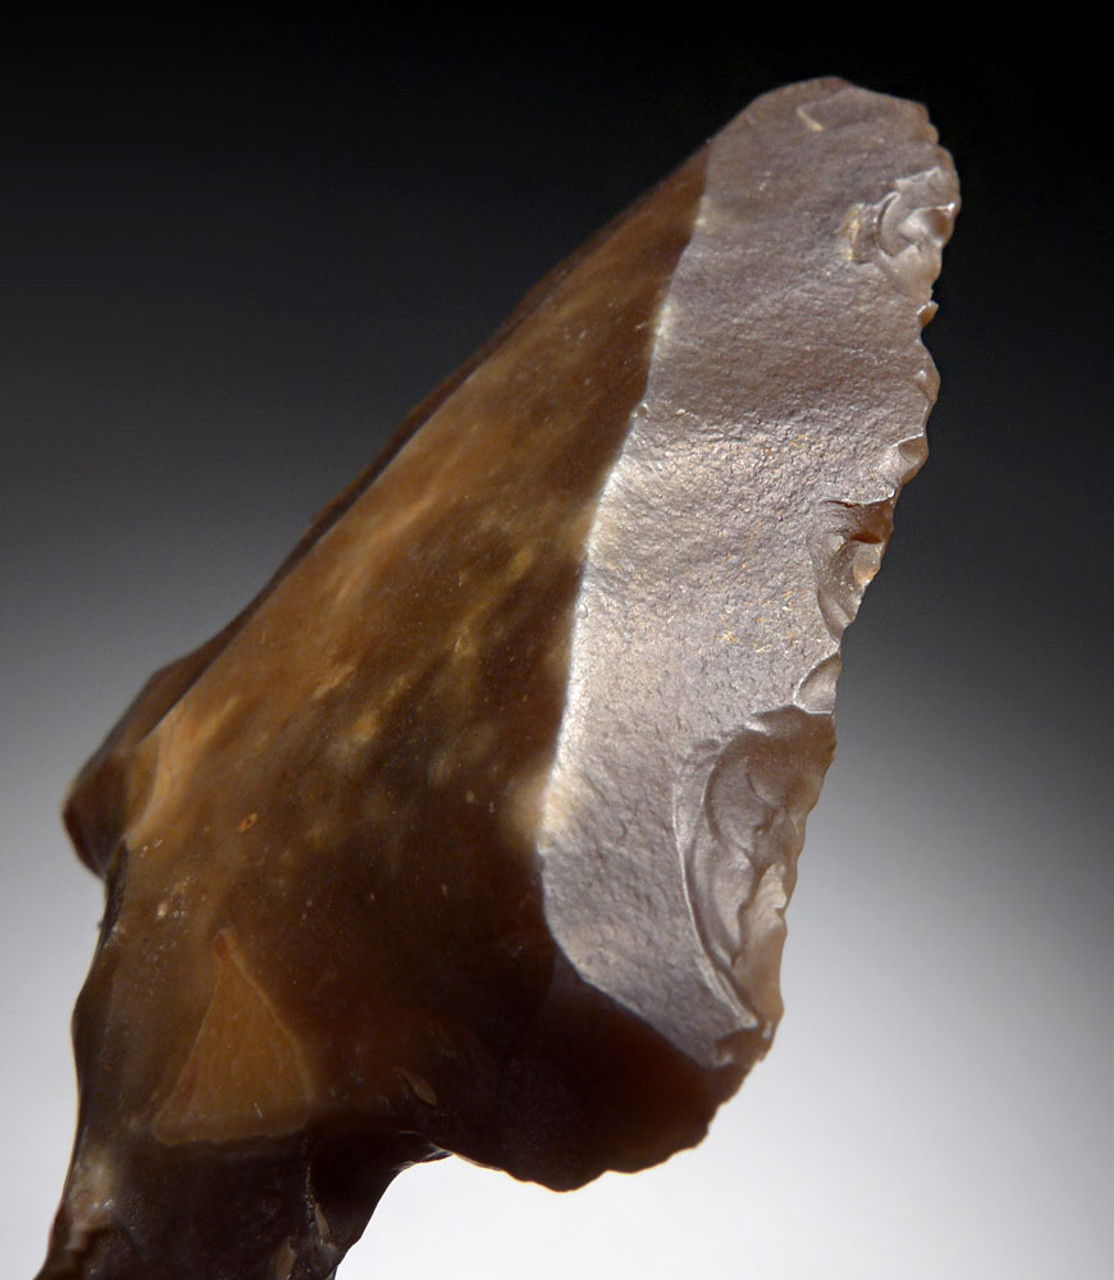  EXCELLENT MIDDLE STONE AGE ATERIAN TANGED POINT - OLDEST KNOWN ARROWHEAD  *AT144